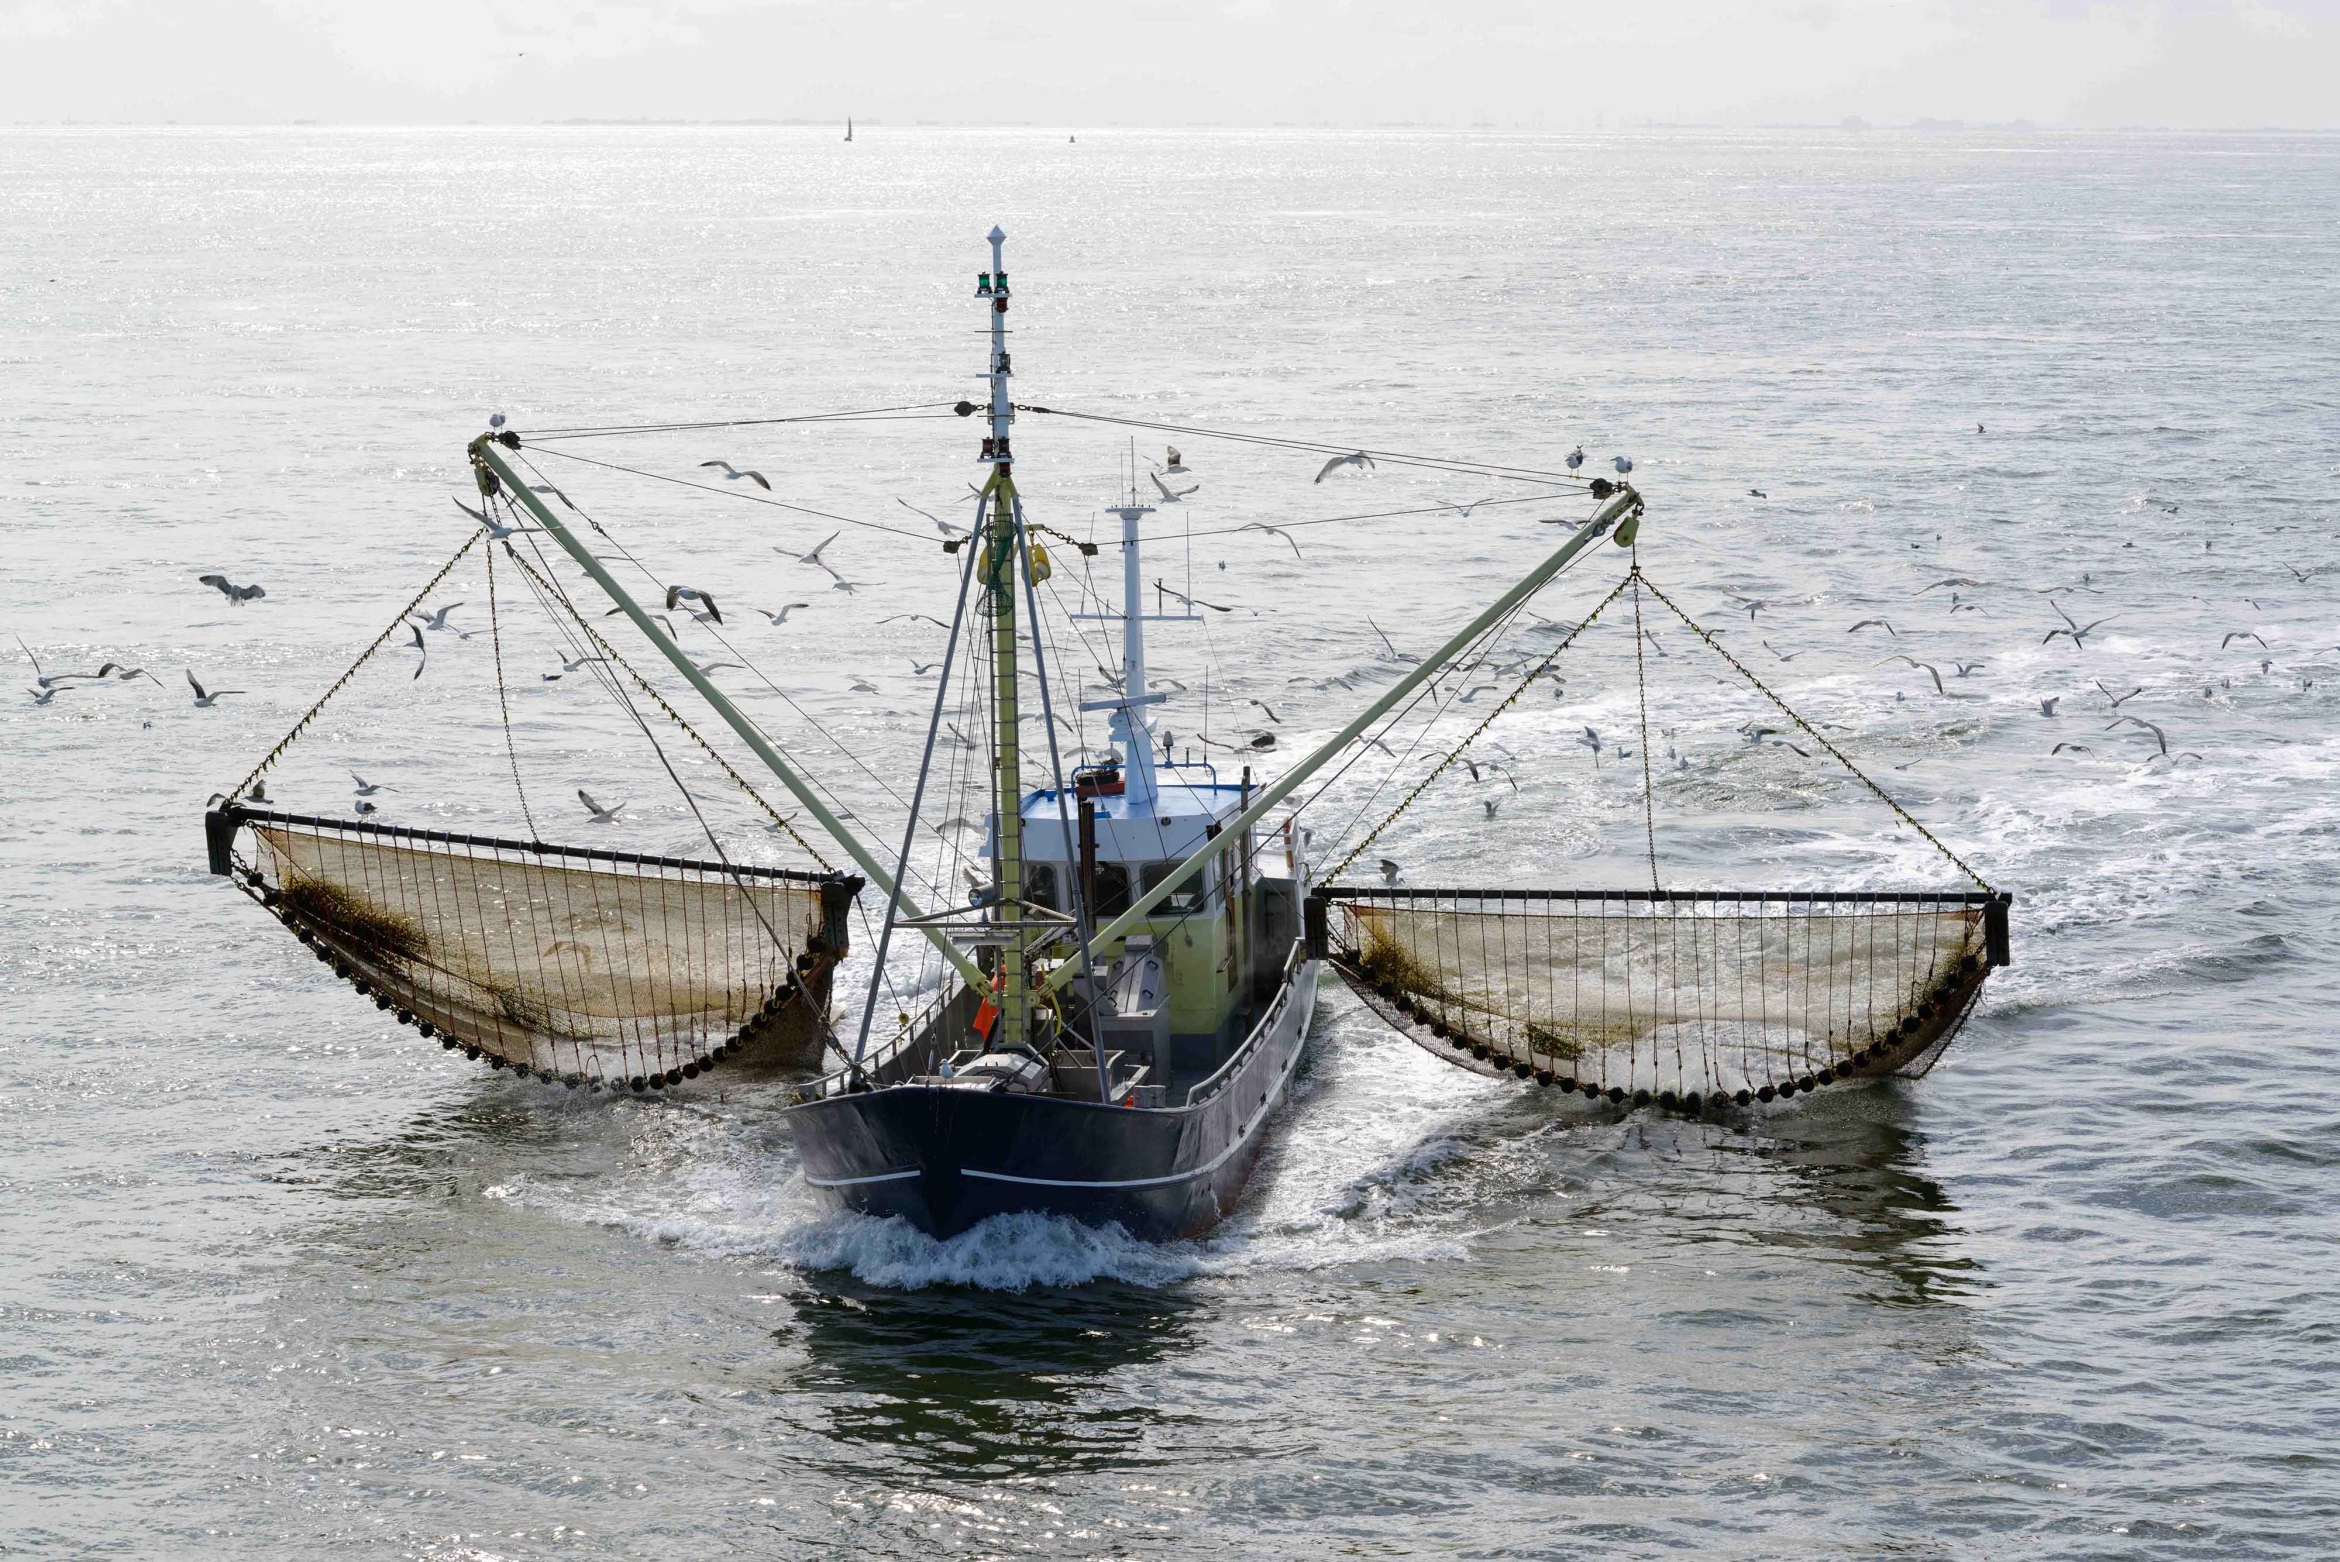 A fishing boat drags nets through the waters of the Wadden Sea, off the coast of the Netherlands.